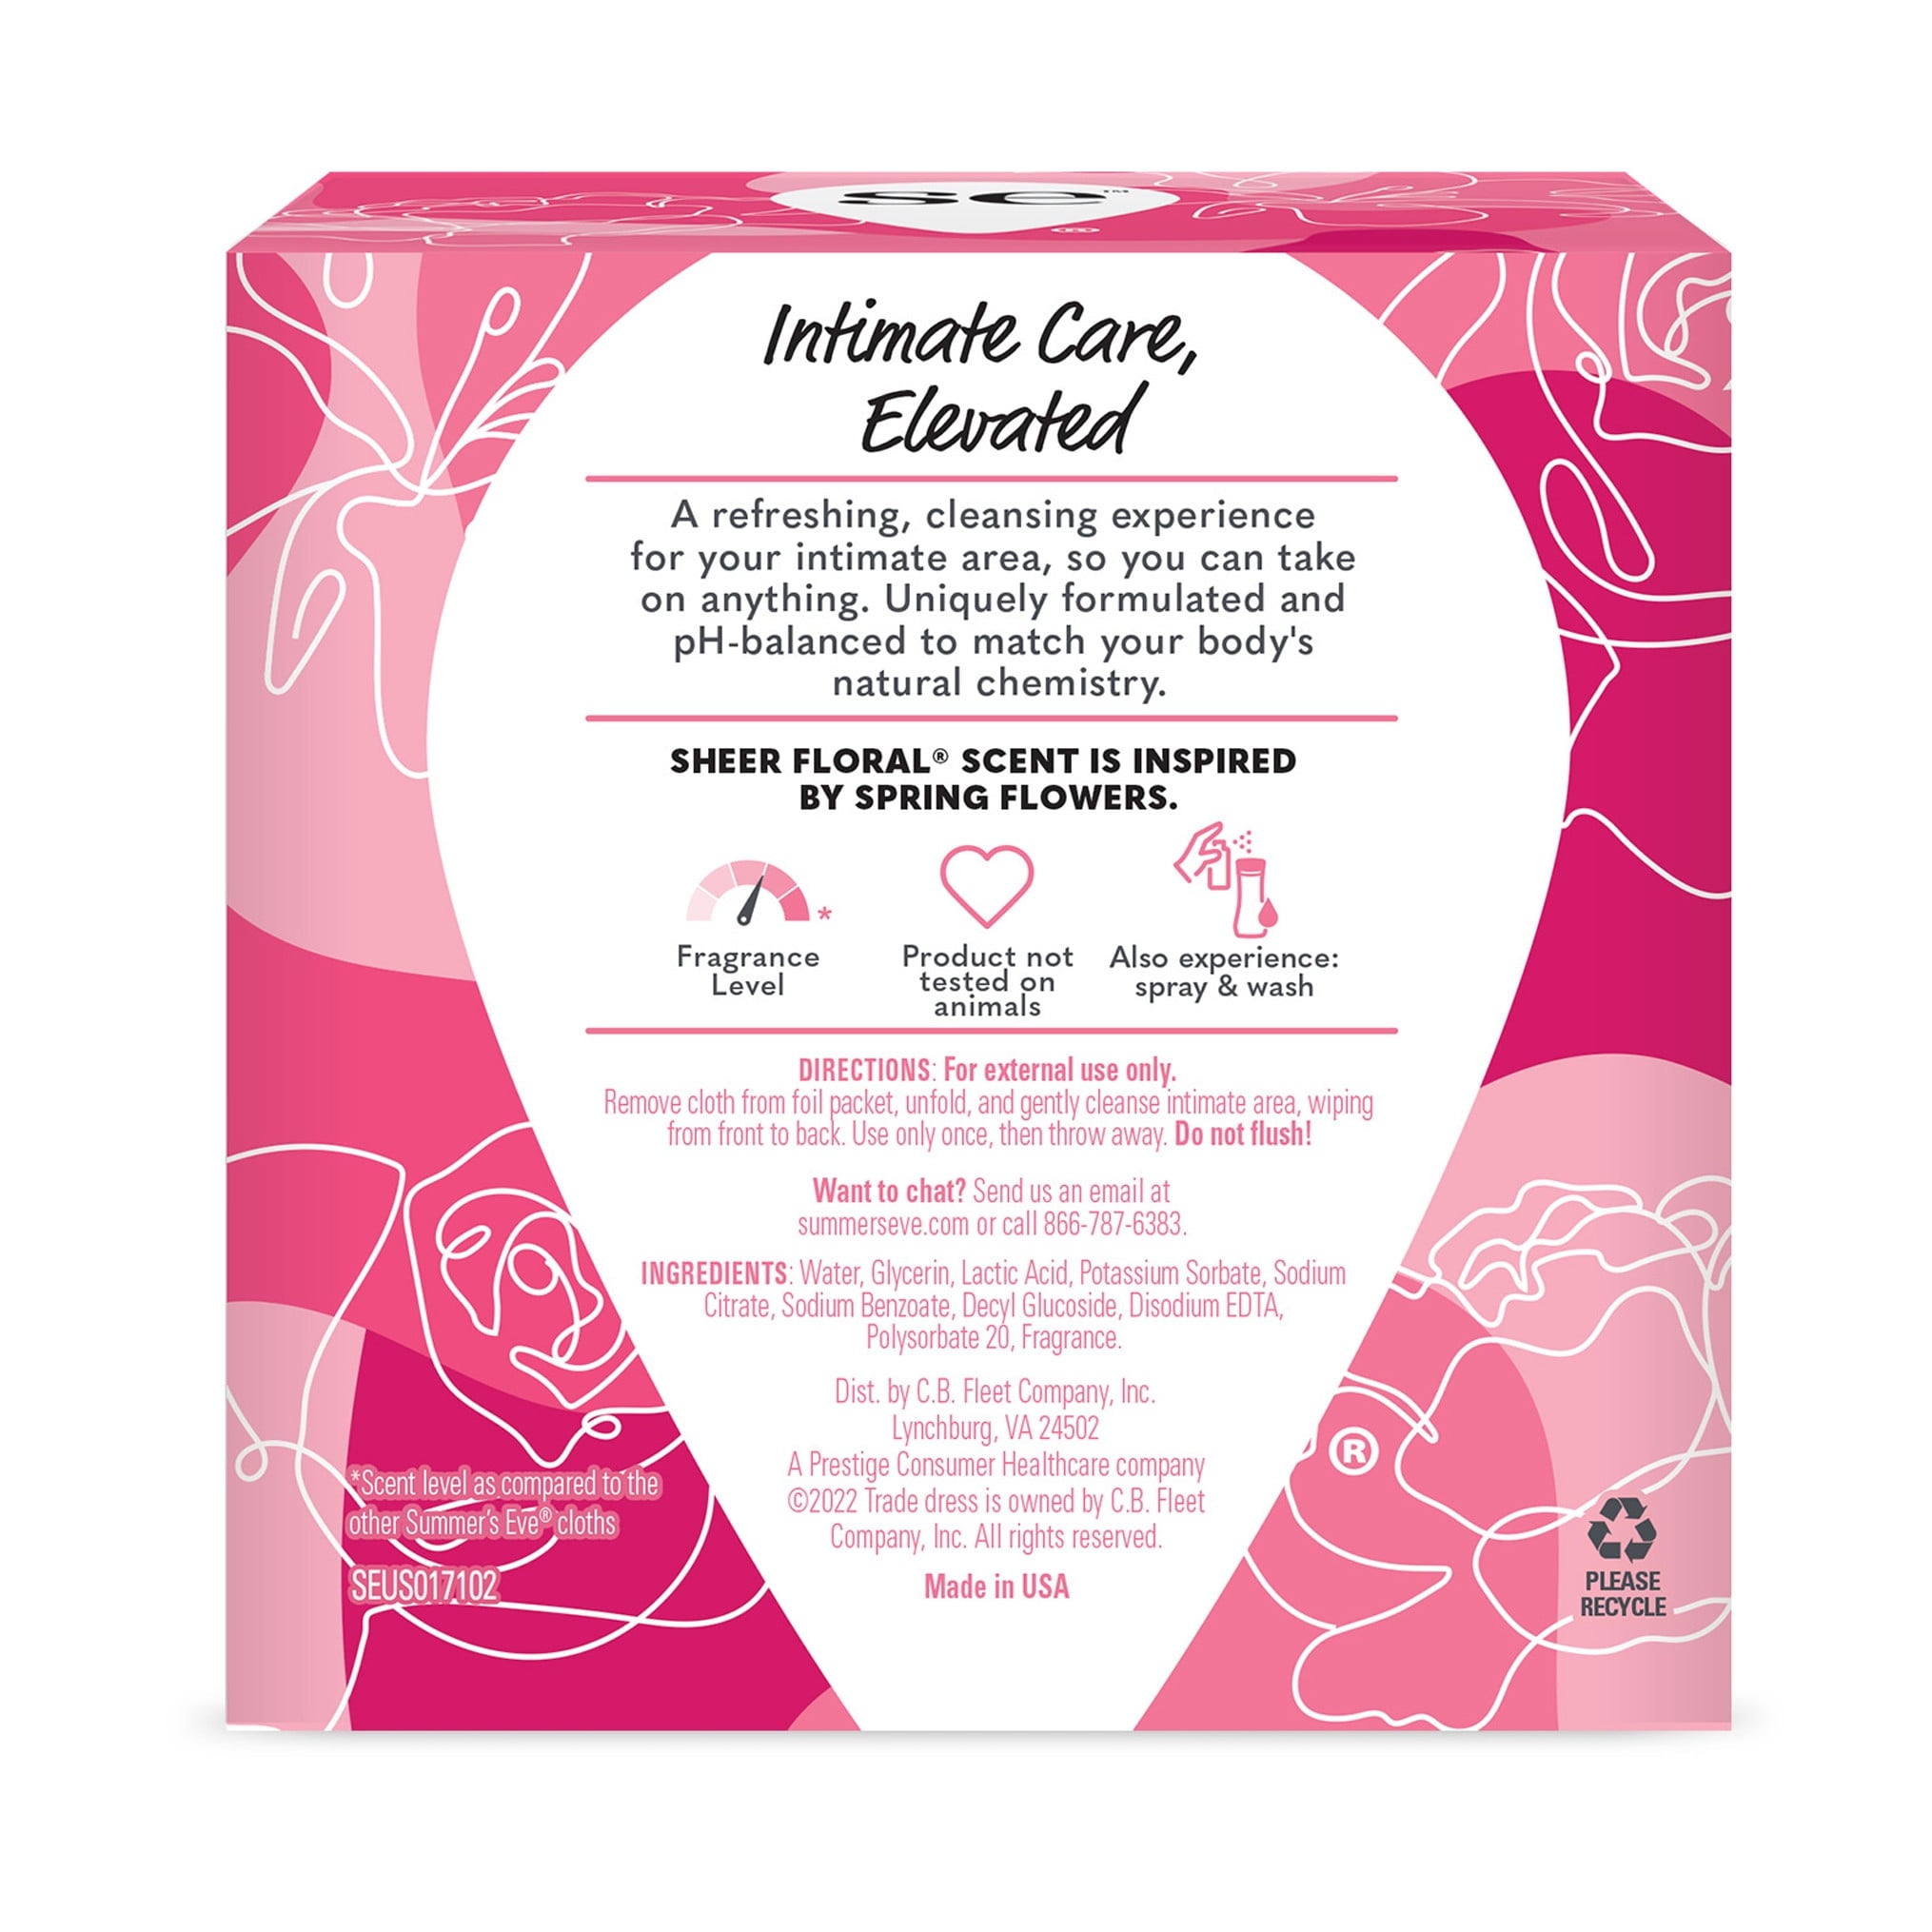 Wholesale prices with free shipping all over United States Summer's Eve Sheer Floral Daily Feminine Wipes, Removes Odor, pH Balanced, 16 count - Steven Deals